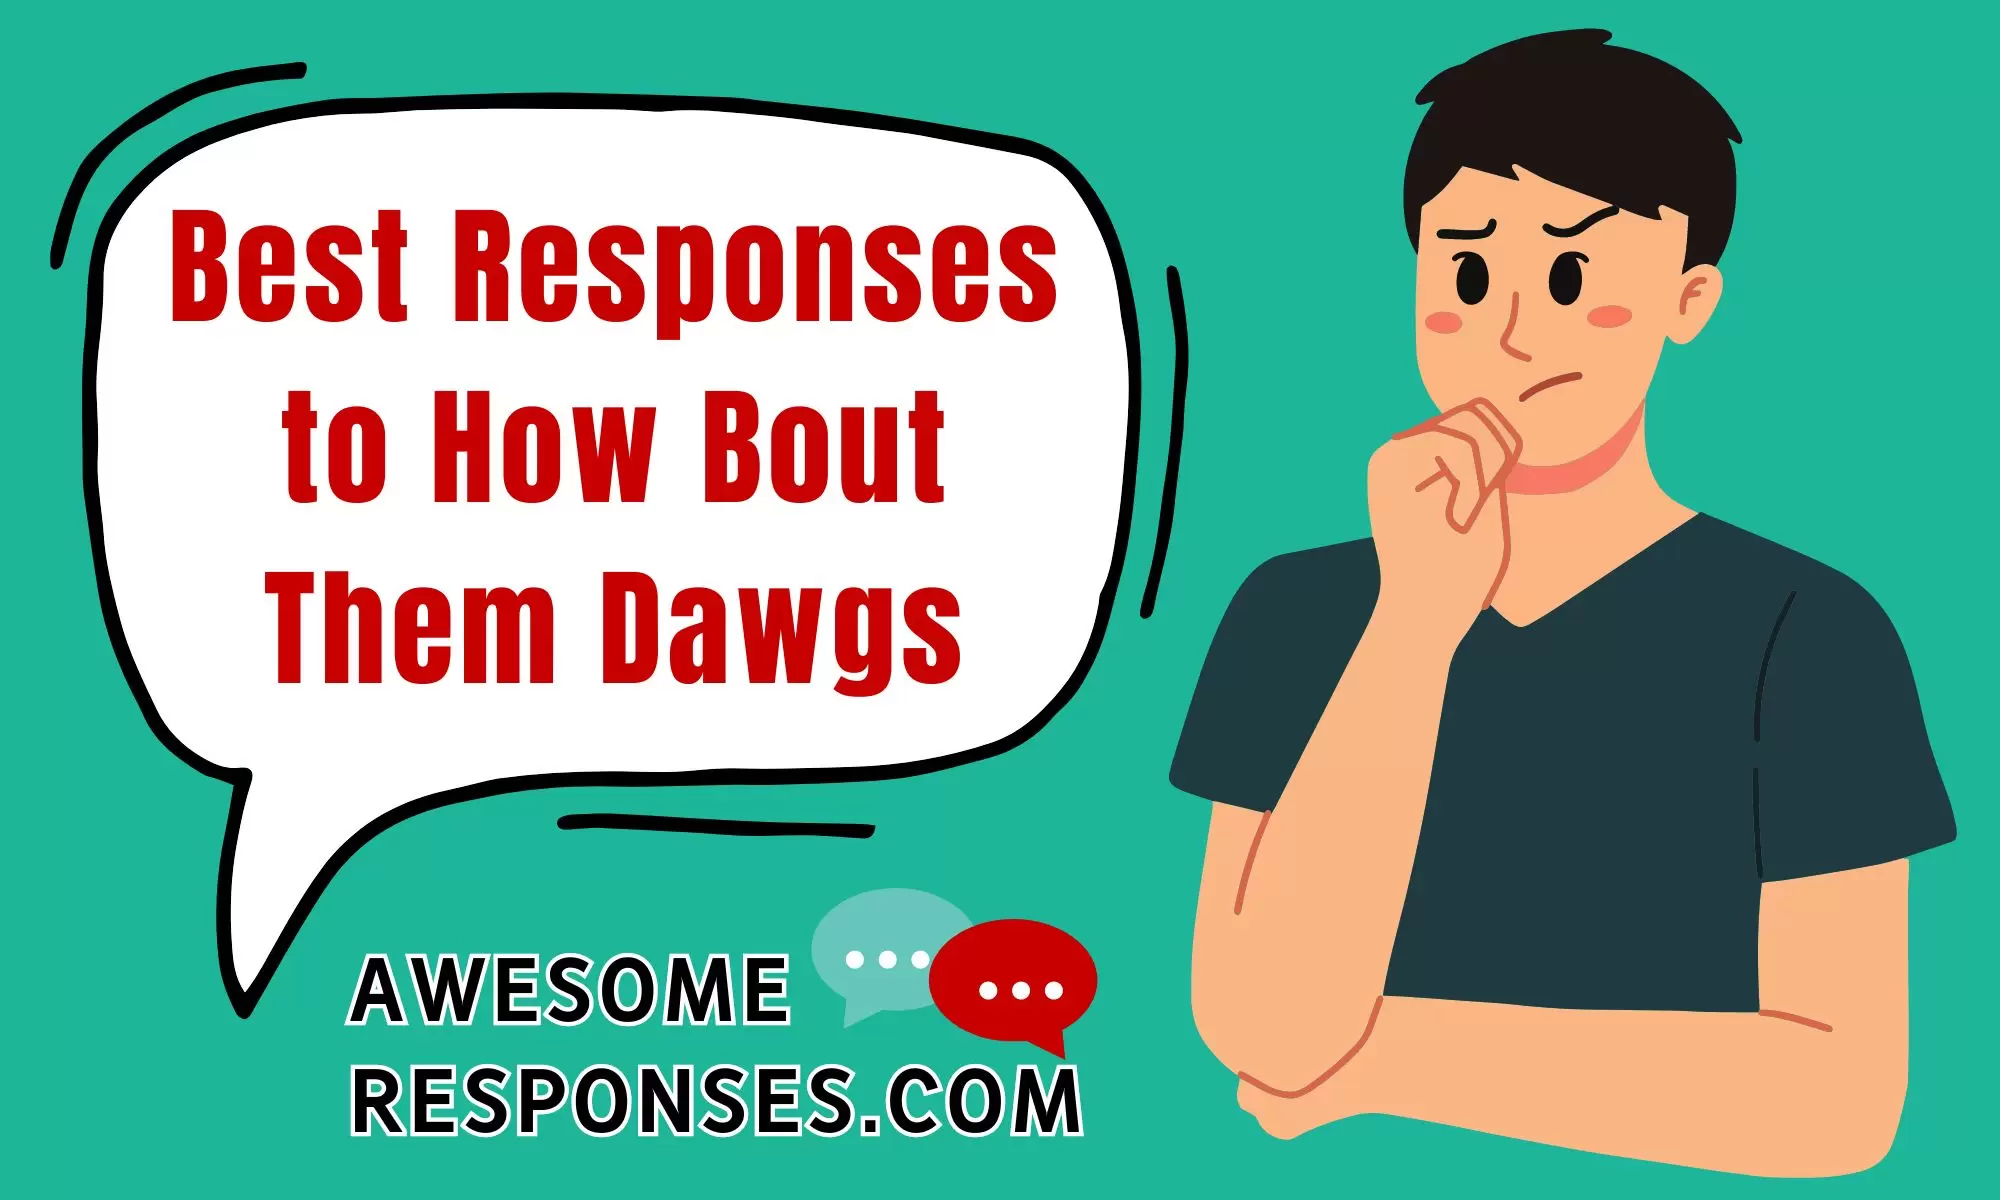 Best Responses to How Bout Them Dawgs